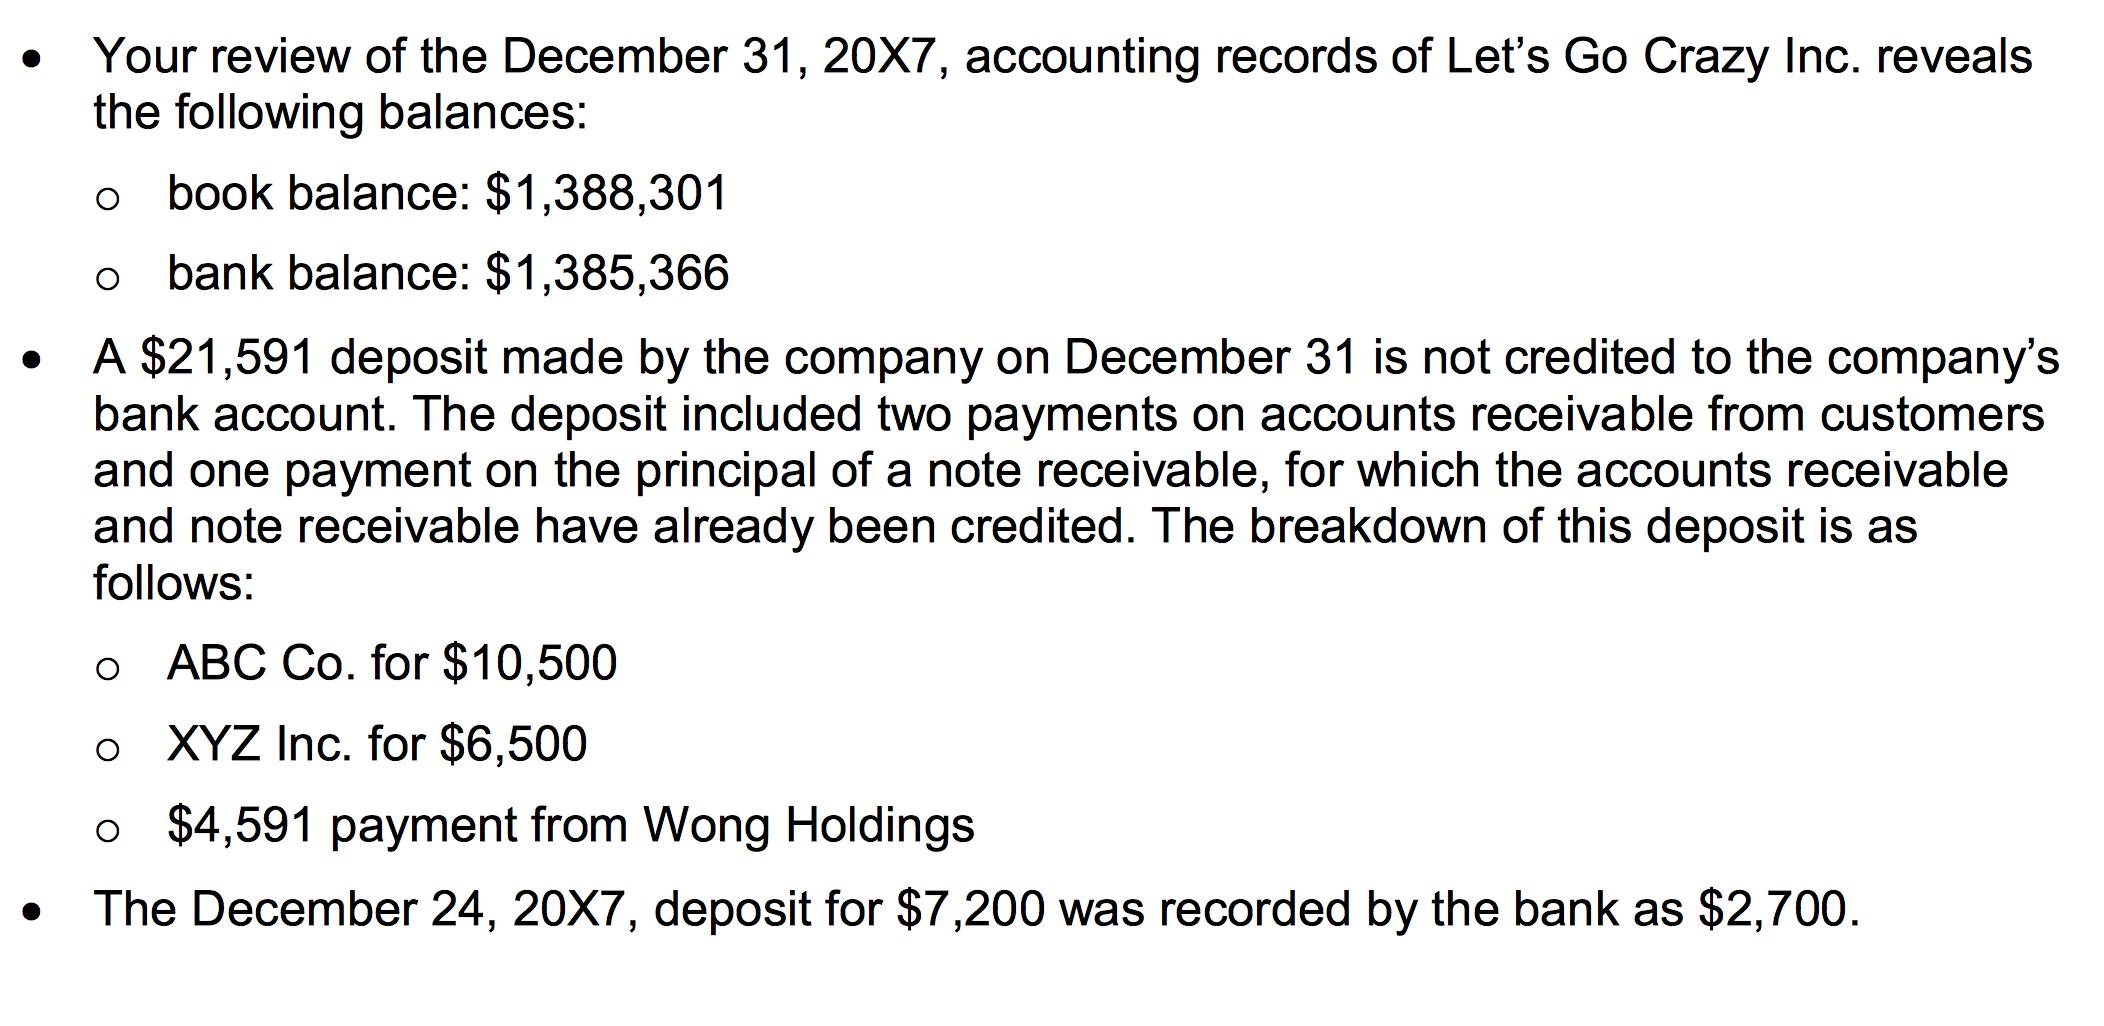 Your review of the December 31, 20X7, accounting records of Let's Go Crazy Inc. reveals the following